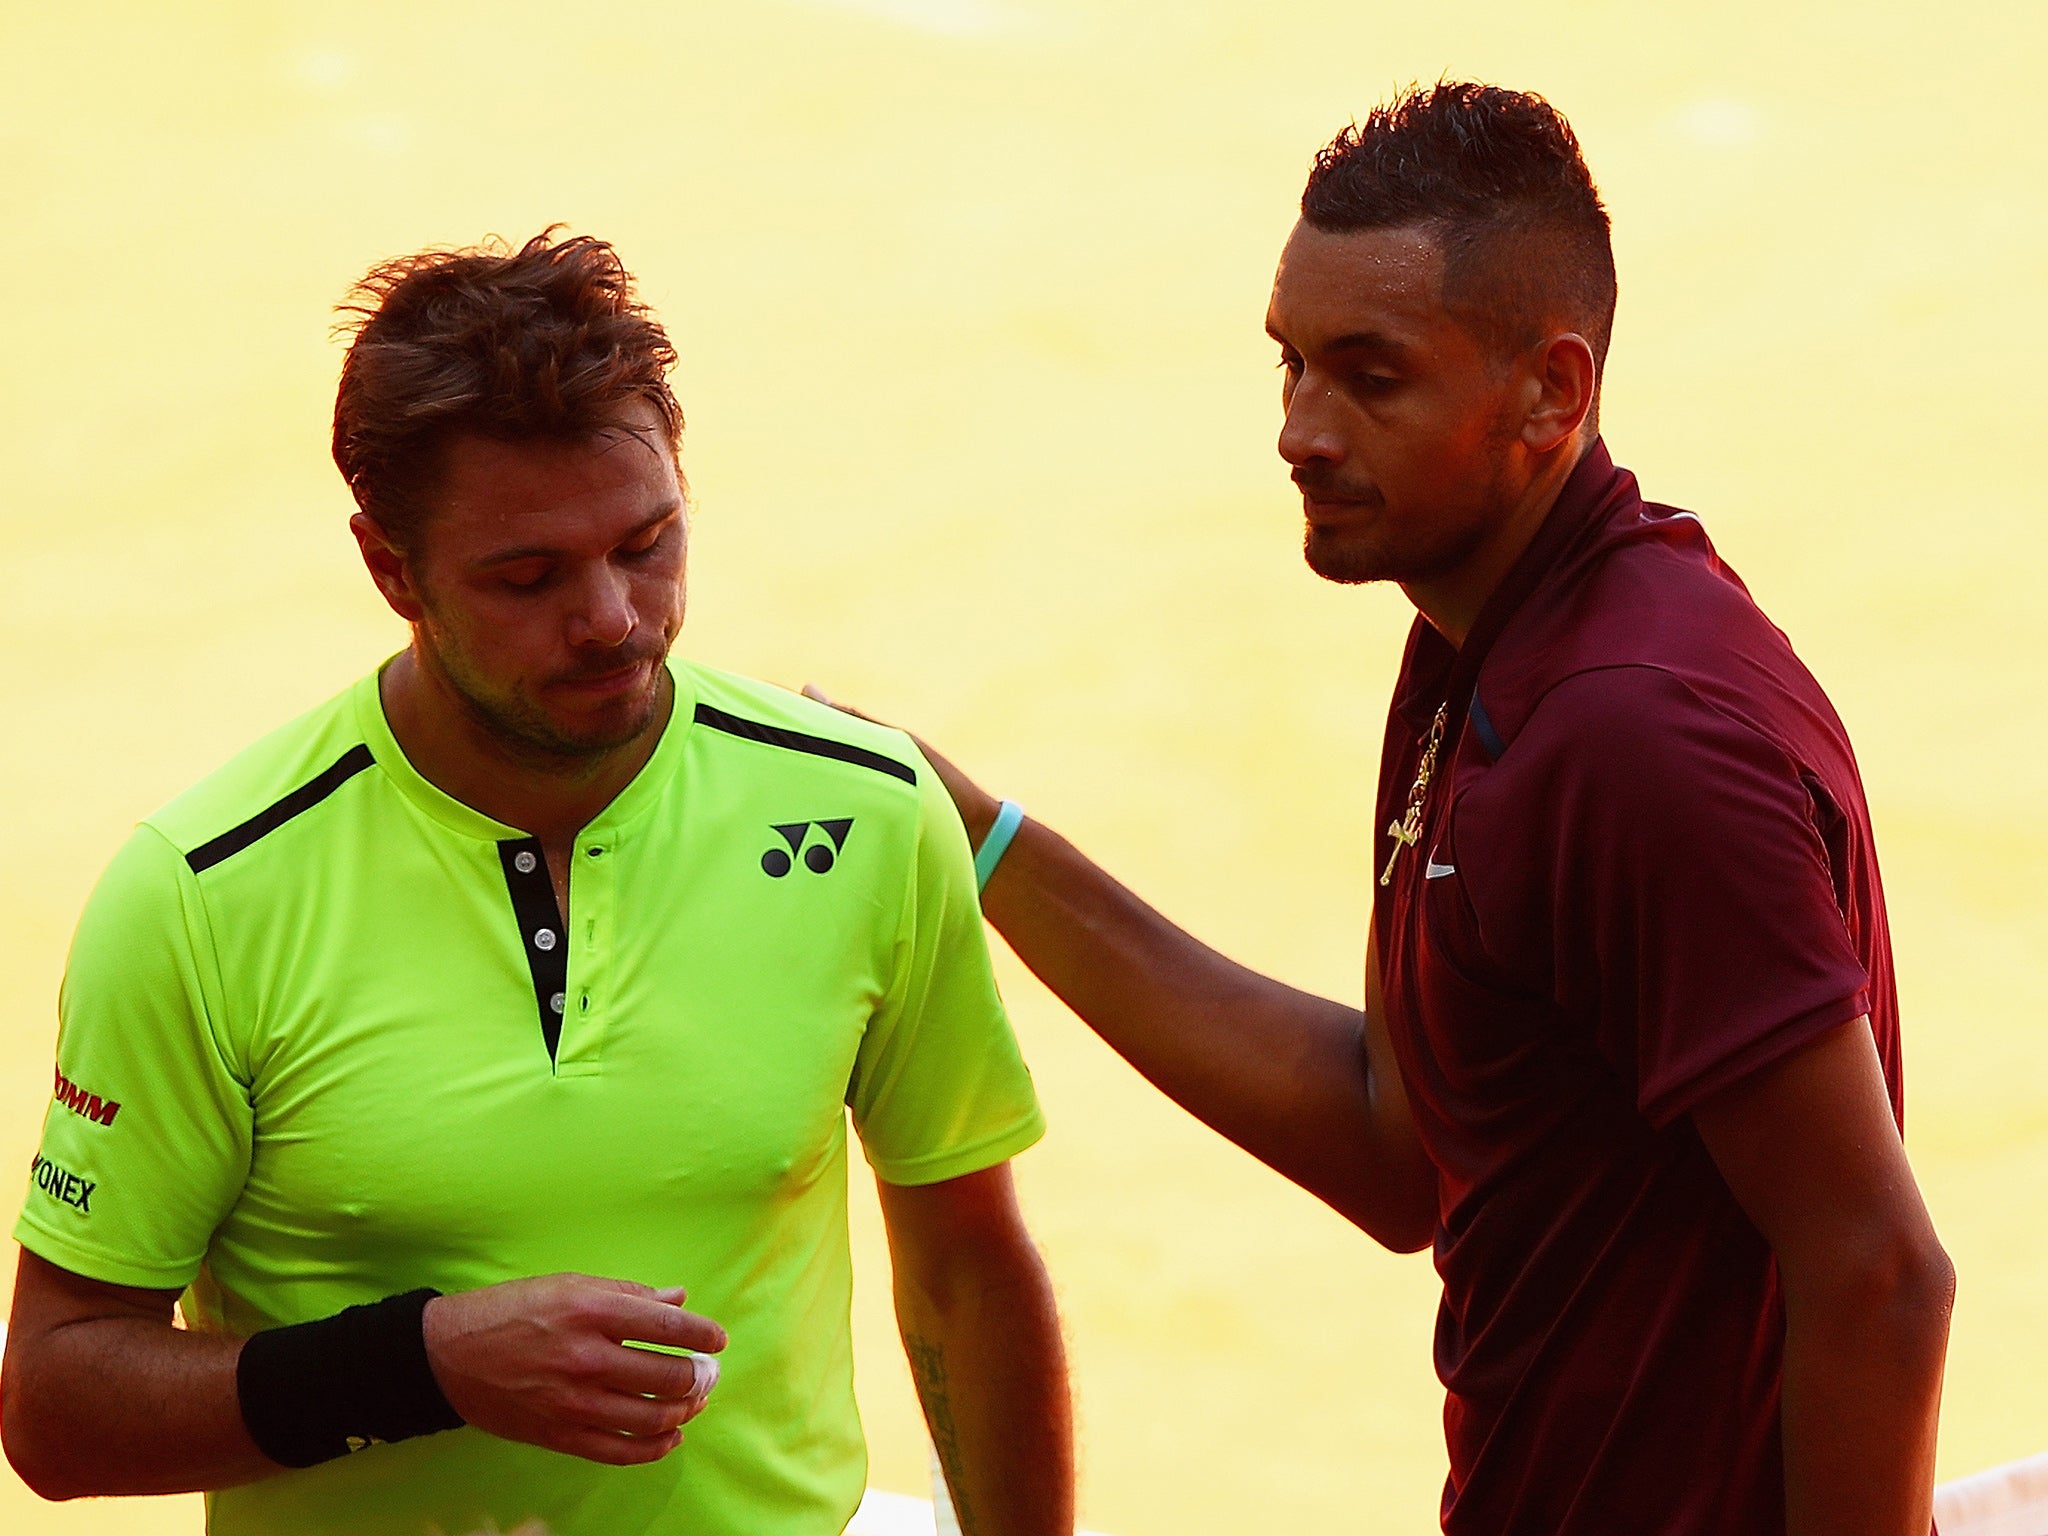 Stan Wawrinka and Nick Kyrgios embrace after the match